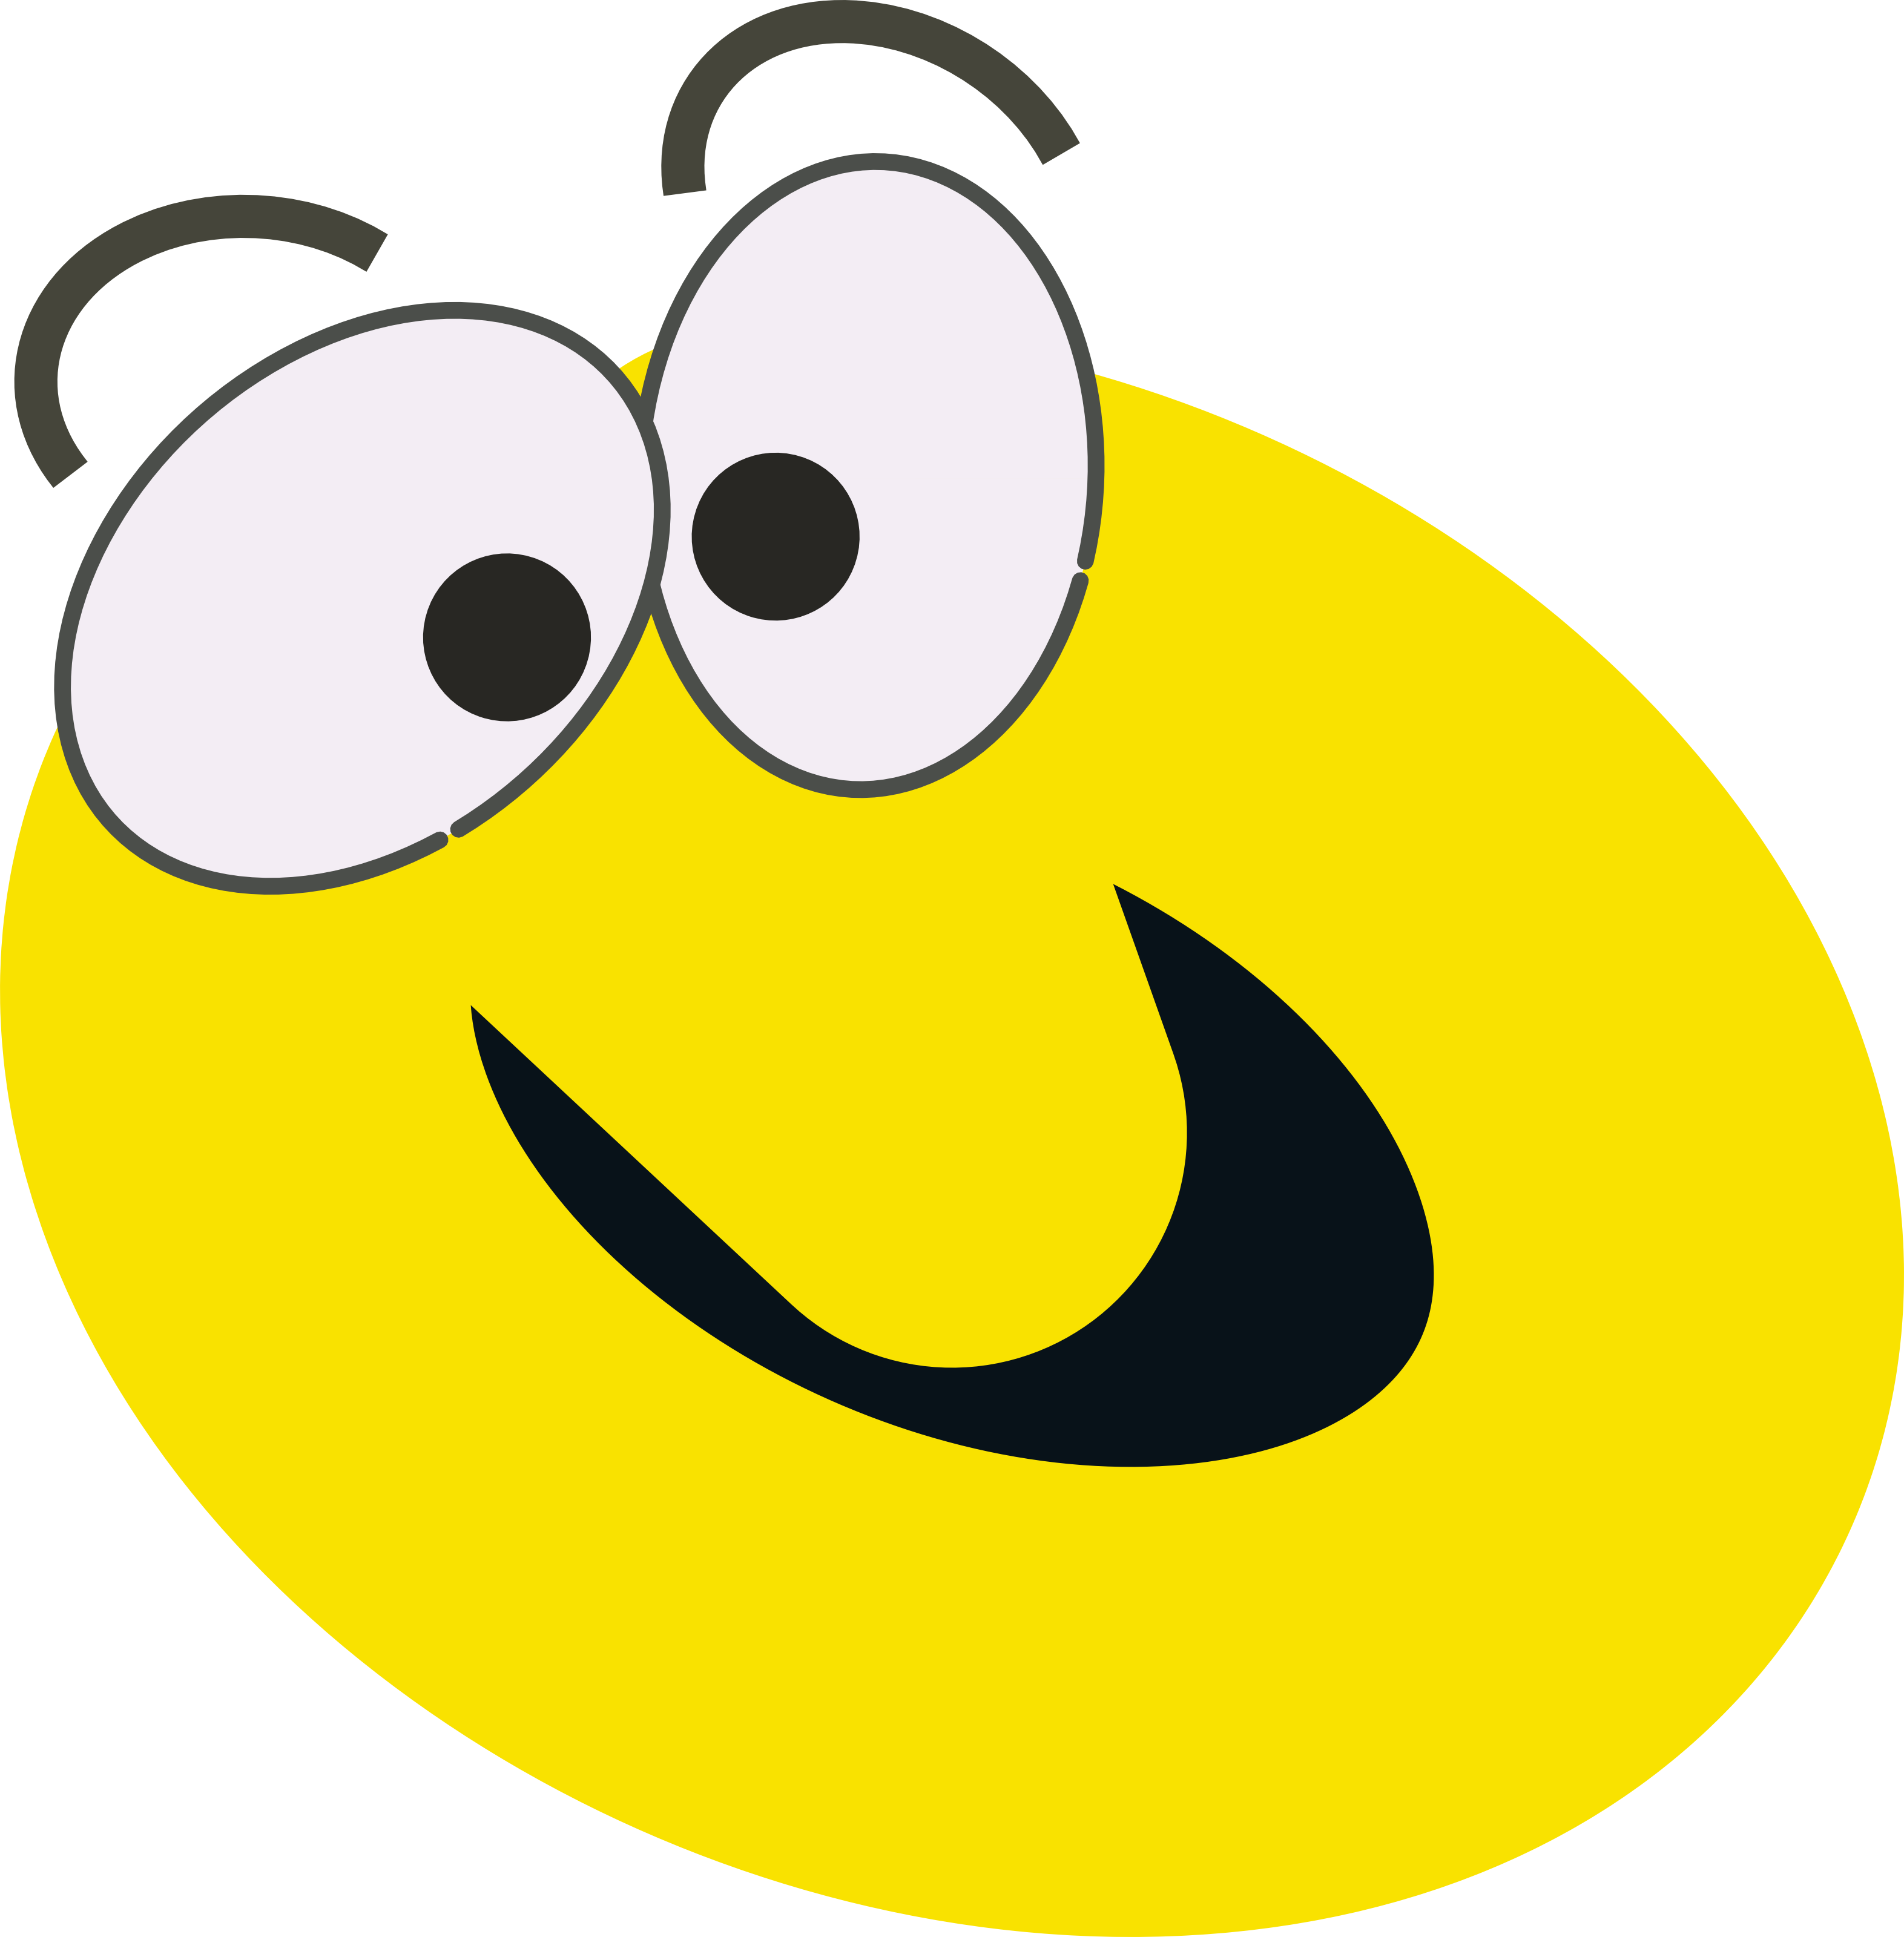 Free vector graphic of a cartoon styled smile face with big-wide open ...